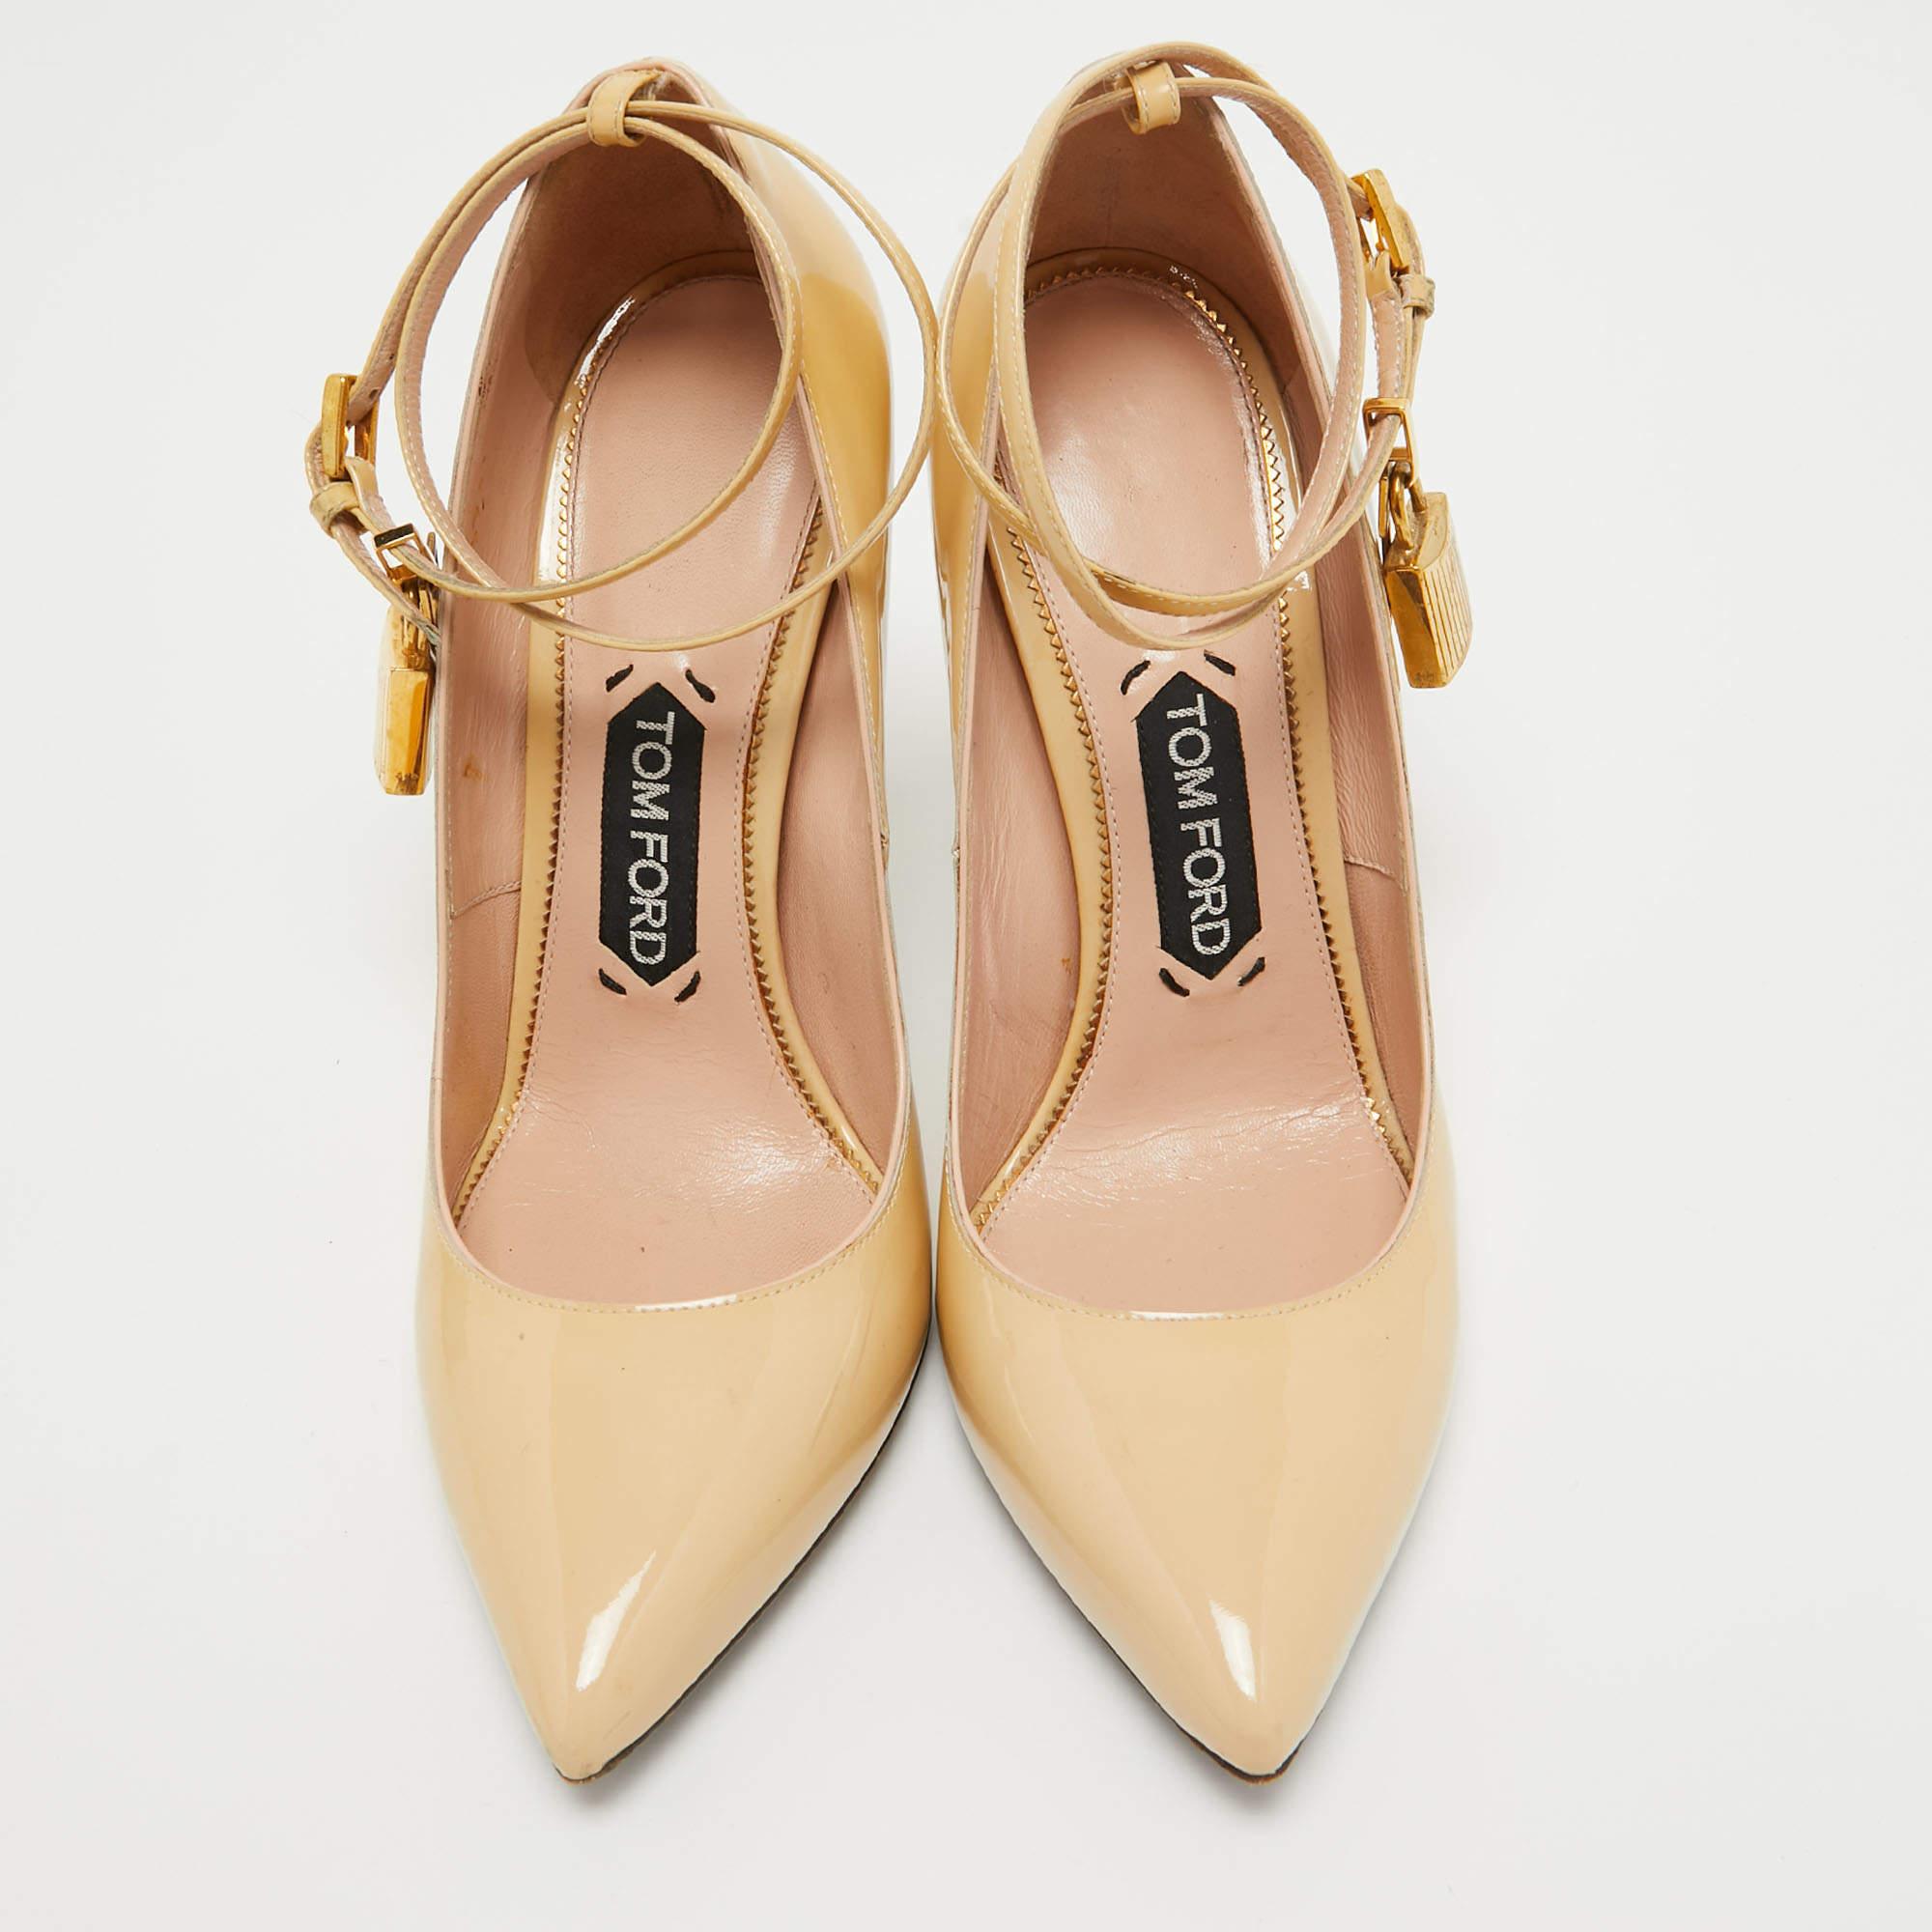 Make a statement with these Tom Ford pumps for women. Impeccably crafted, these chic heels offer both fashion and comfort, elevating your look with each graceful step.

